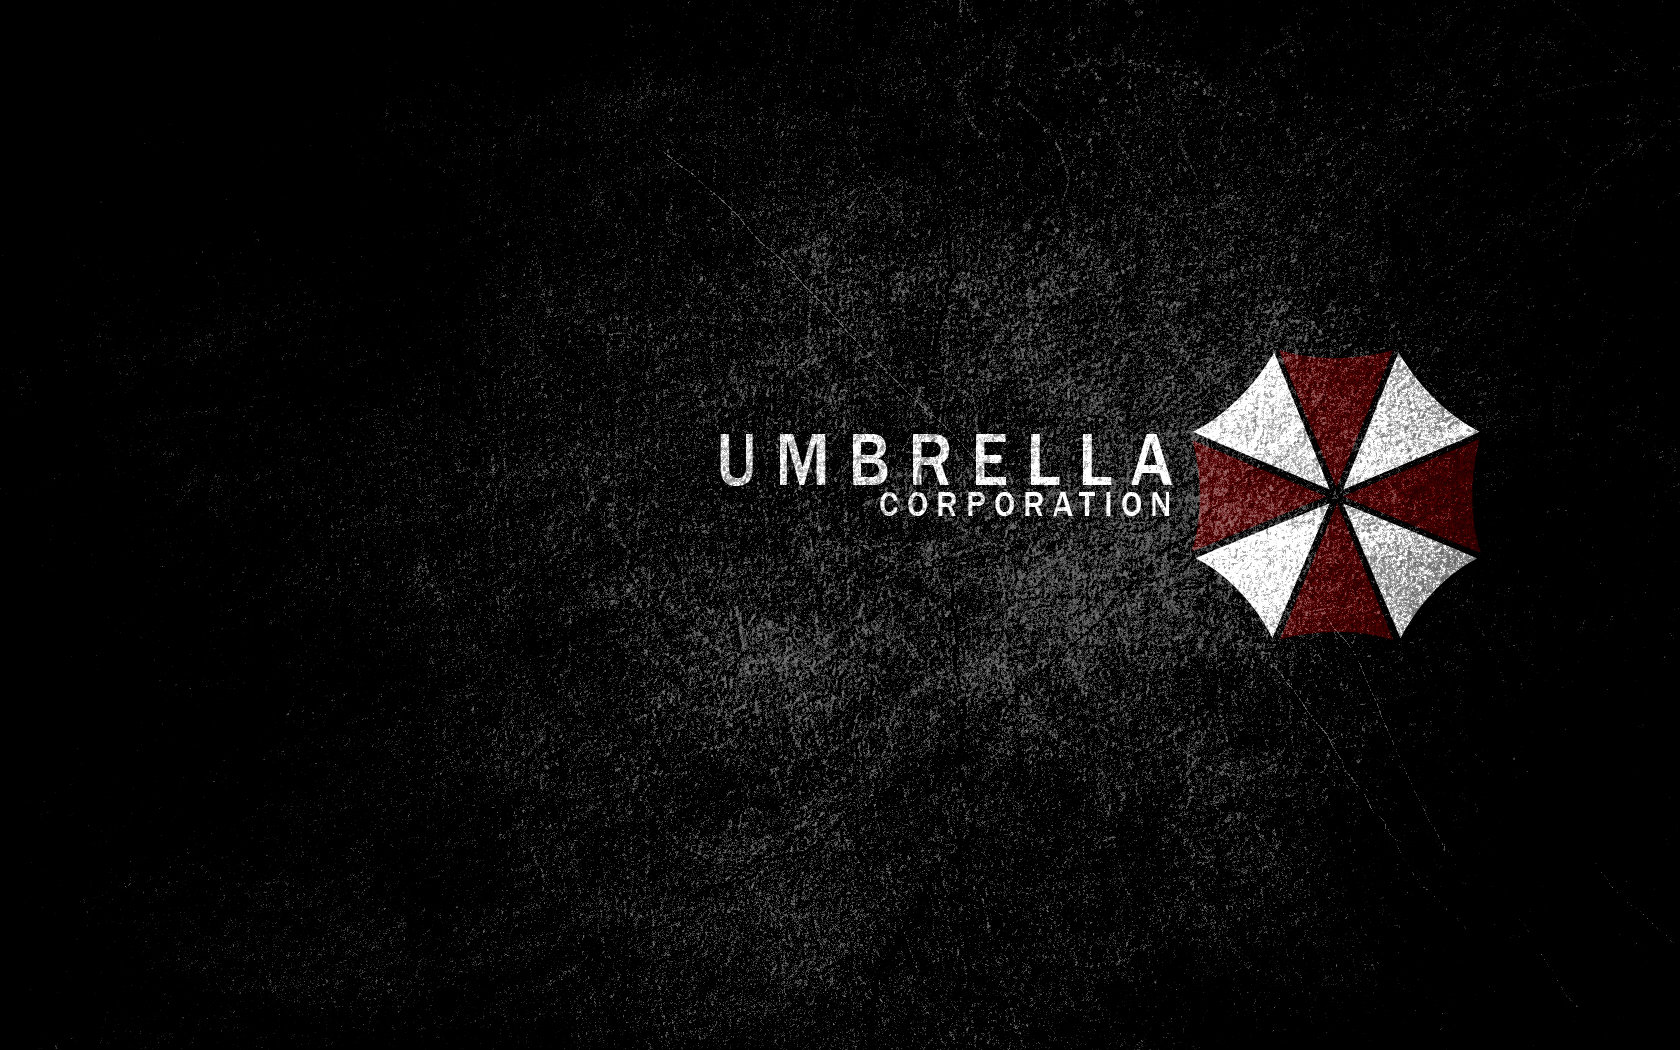 Umbrella corp wallpaper by White Knight 87 on